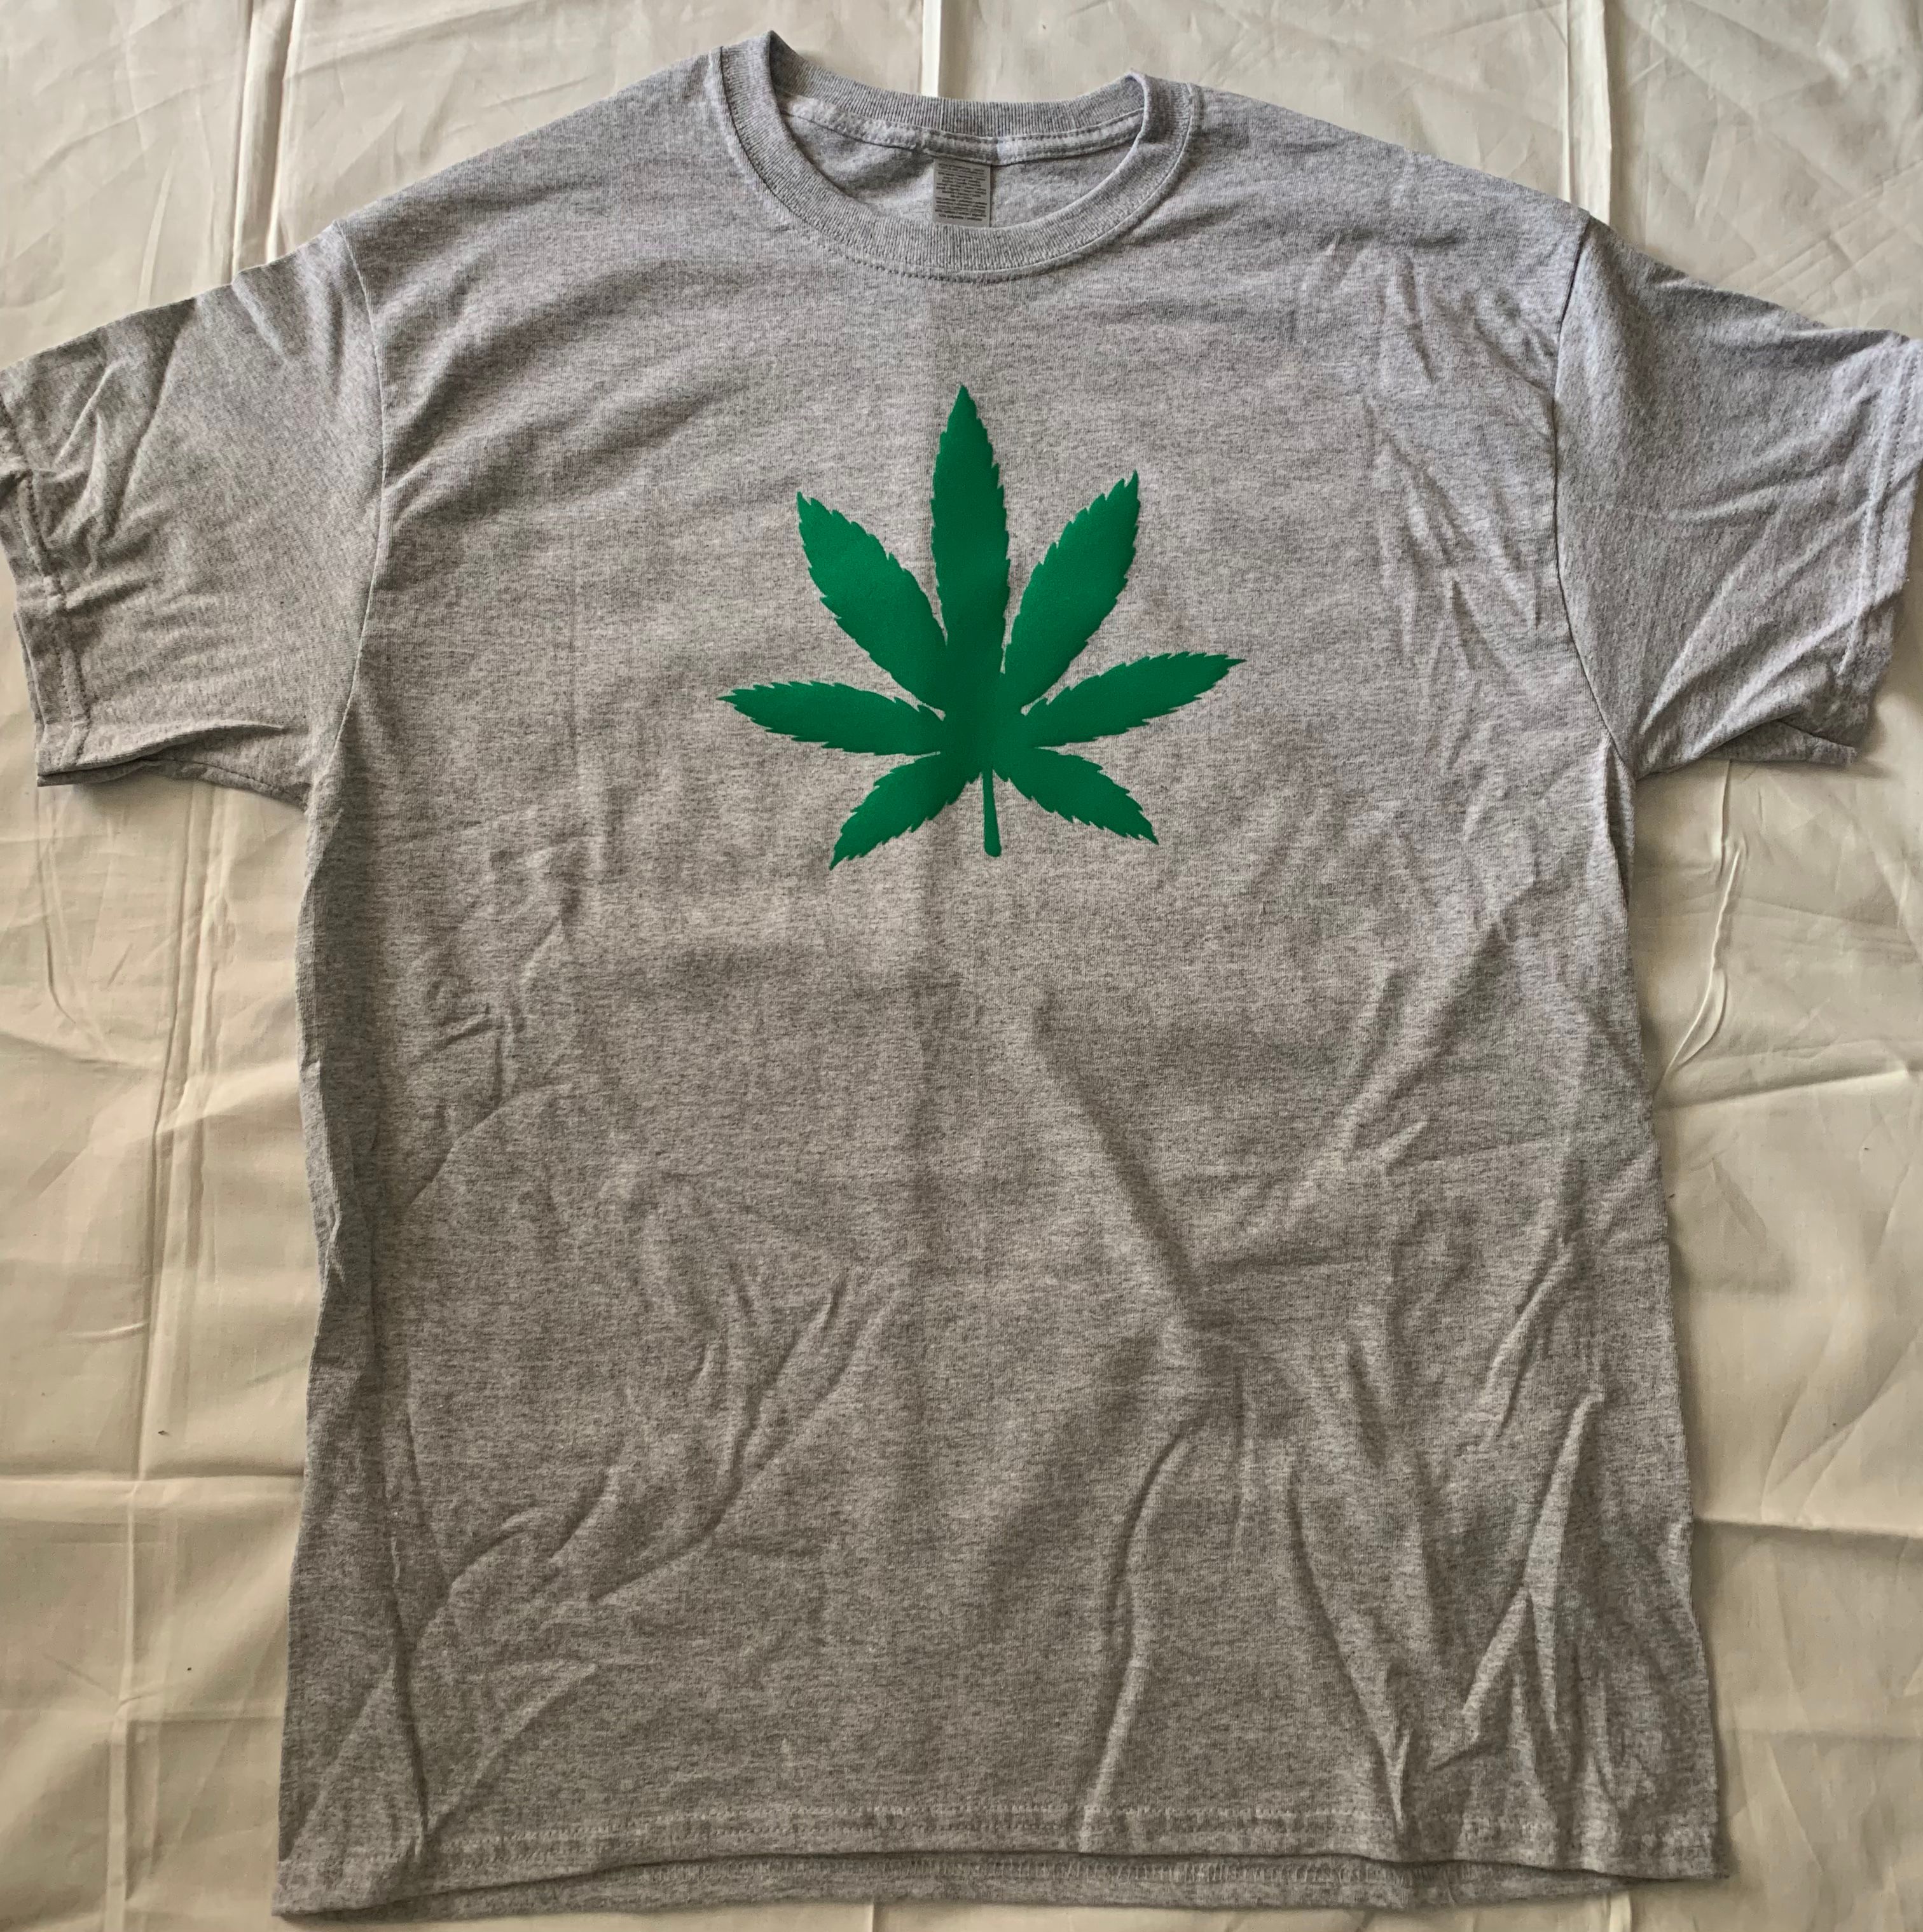 New Weed Leaf T Shirt Available Now!!!